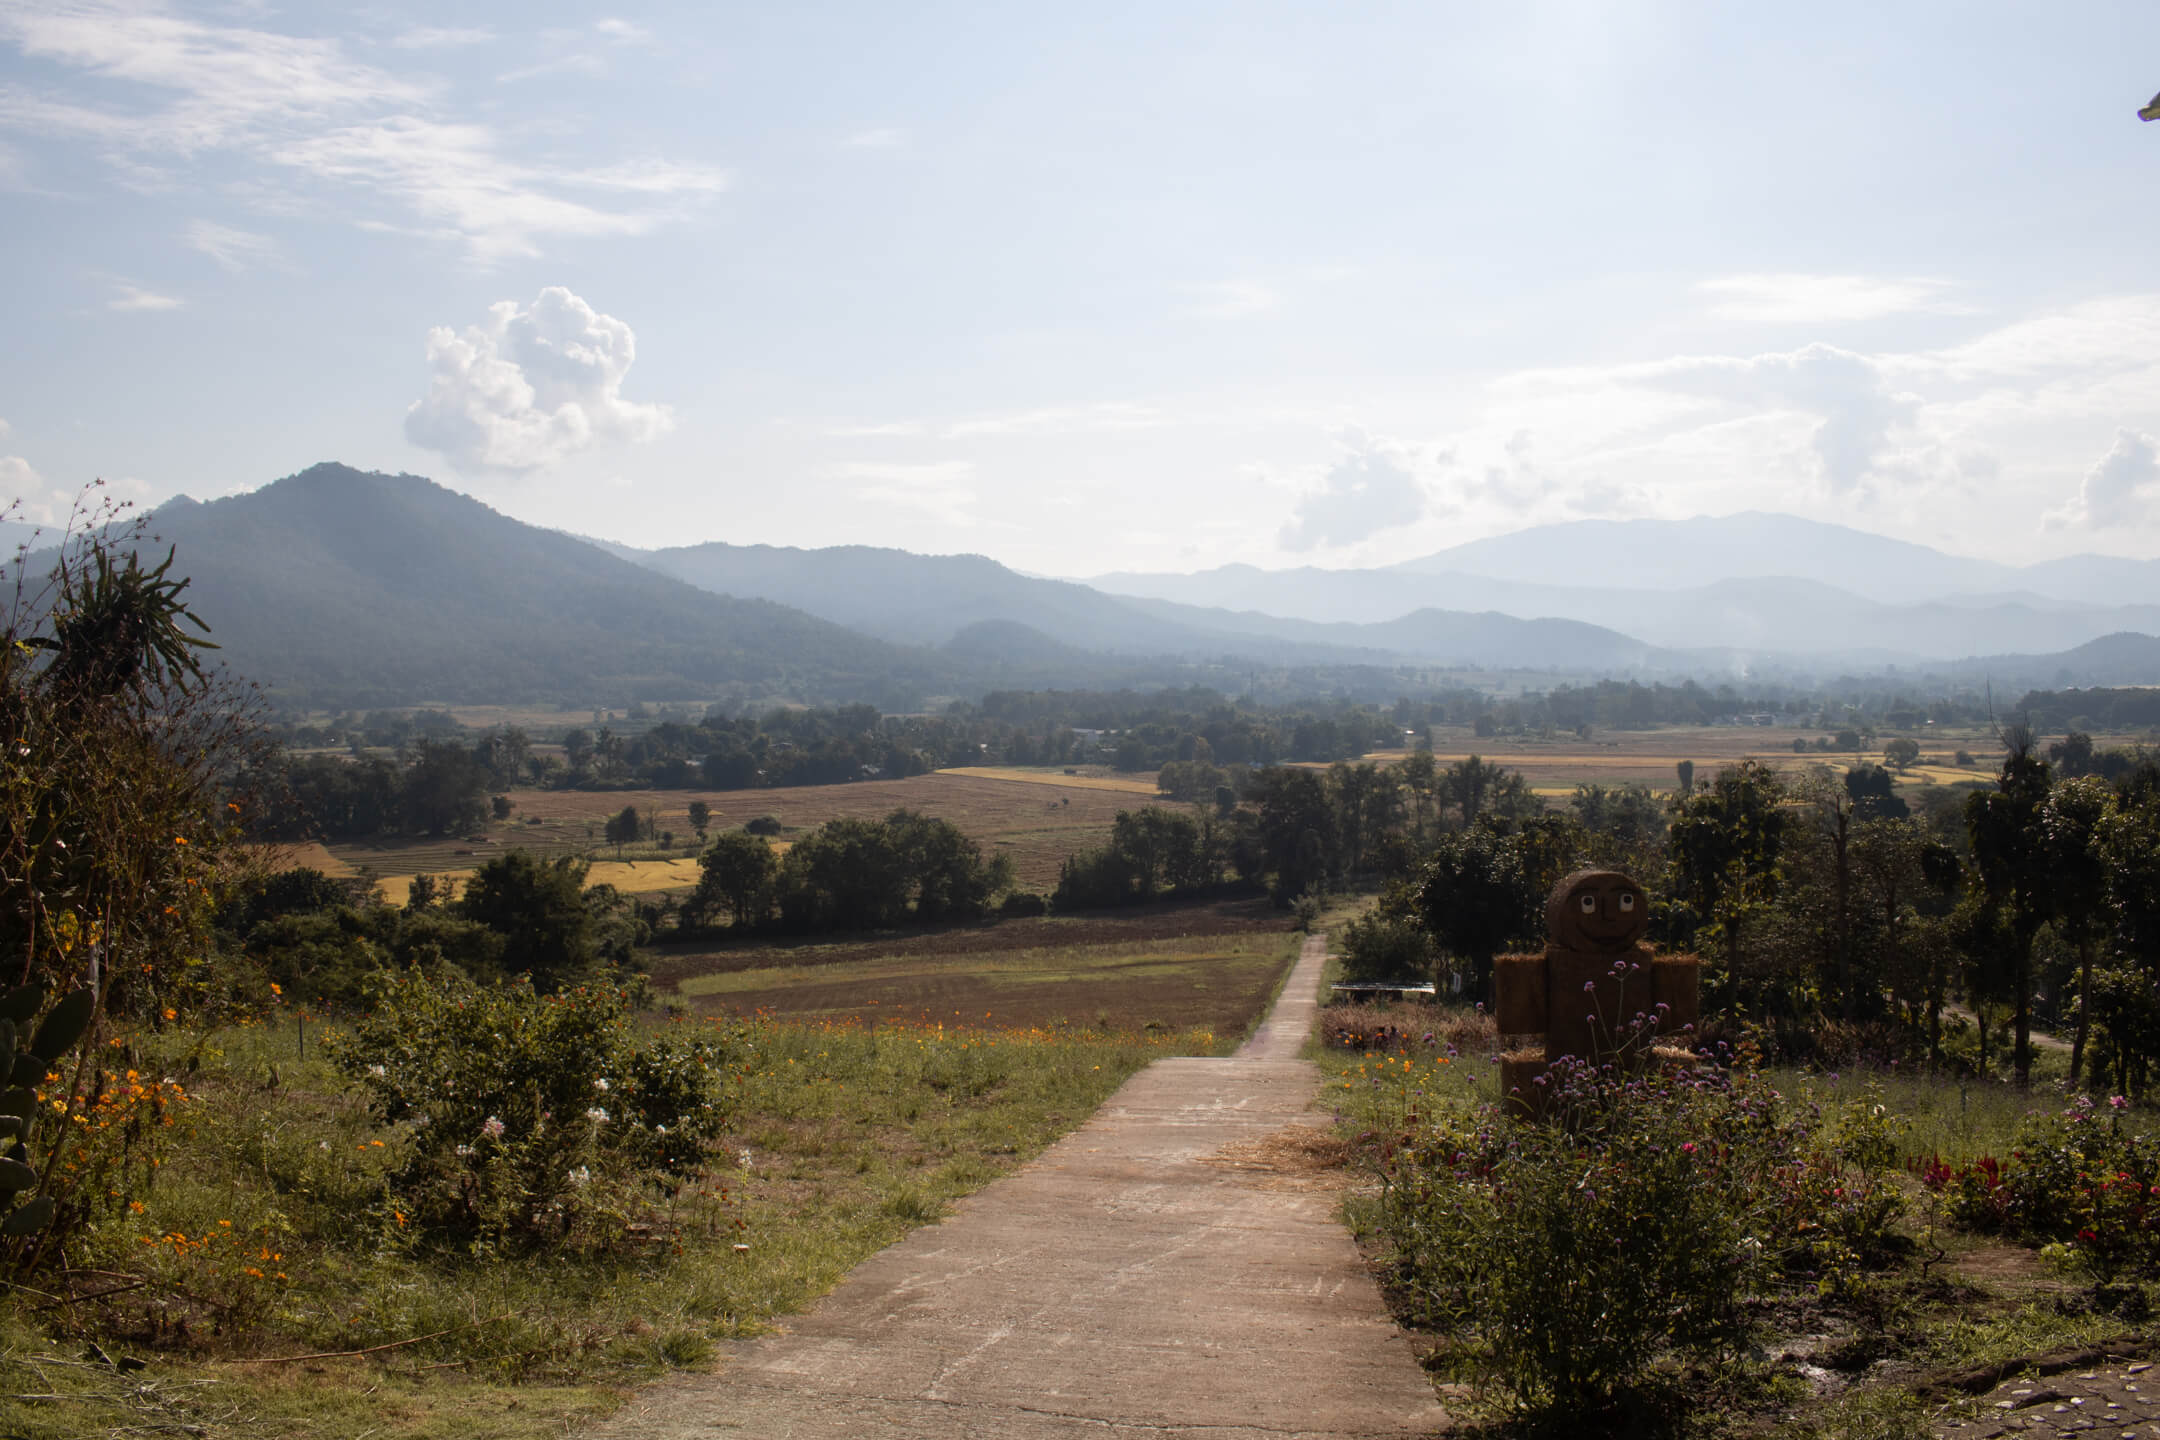 The scenery around Pai in Thailand